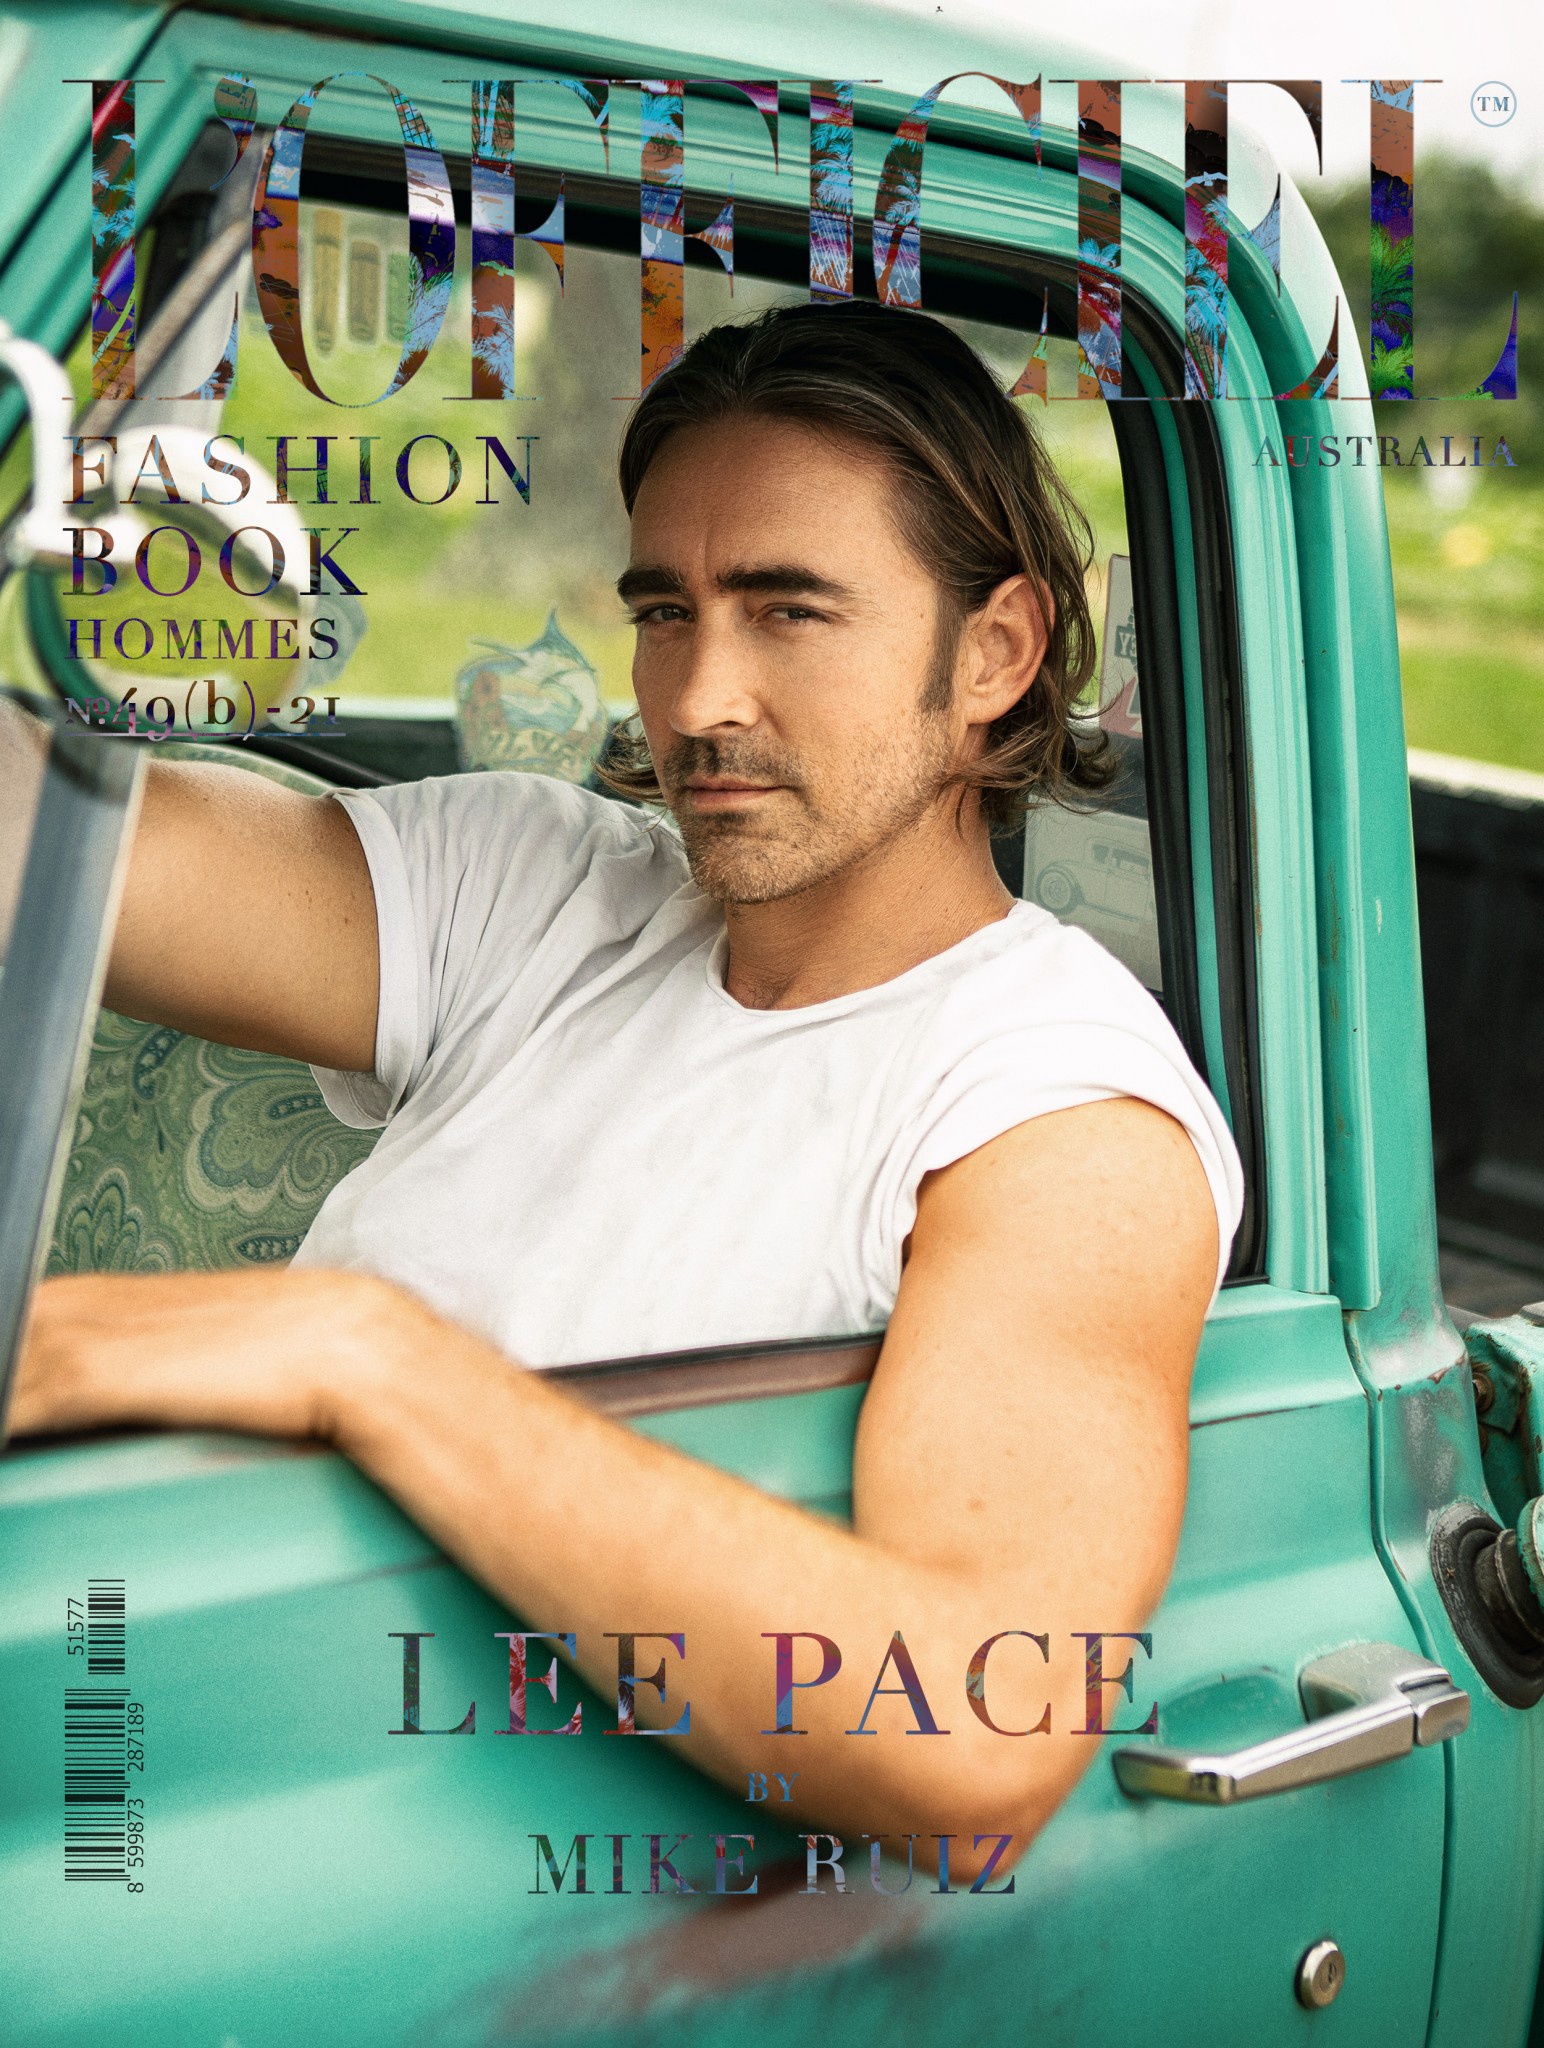 Lee Pace photo #1002530